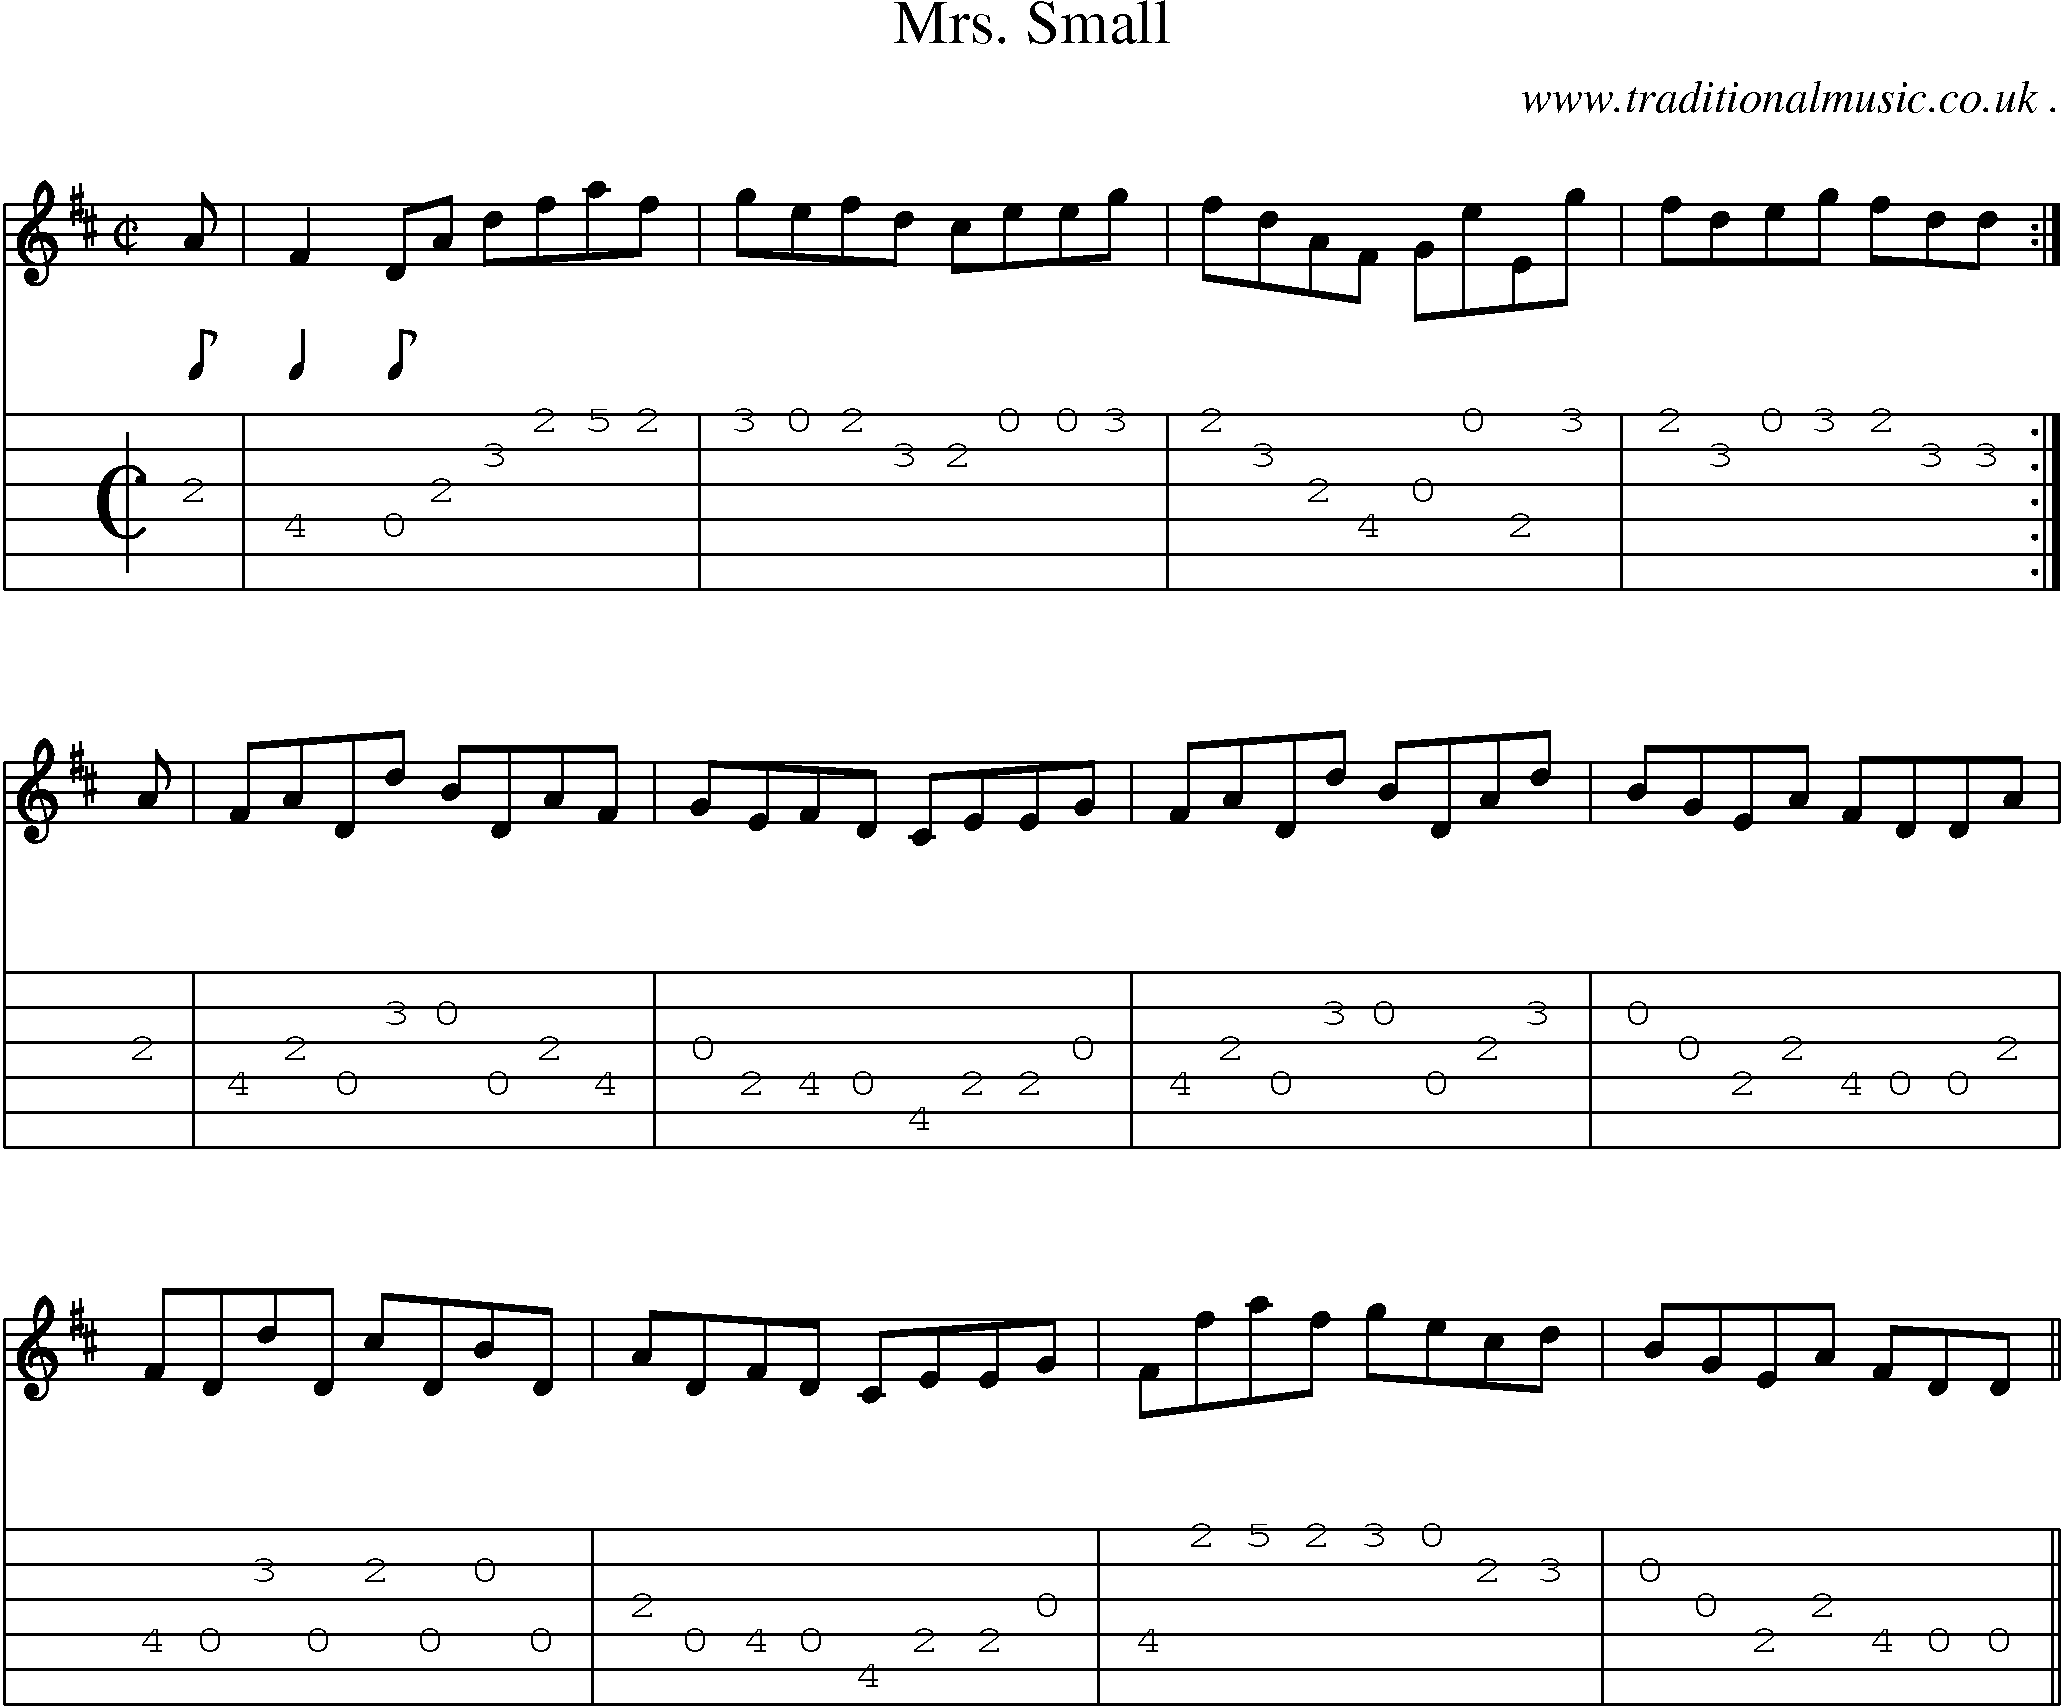 Sheet-music  score, Chords and Guitar Tabs for Mrs Small